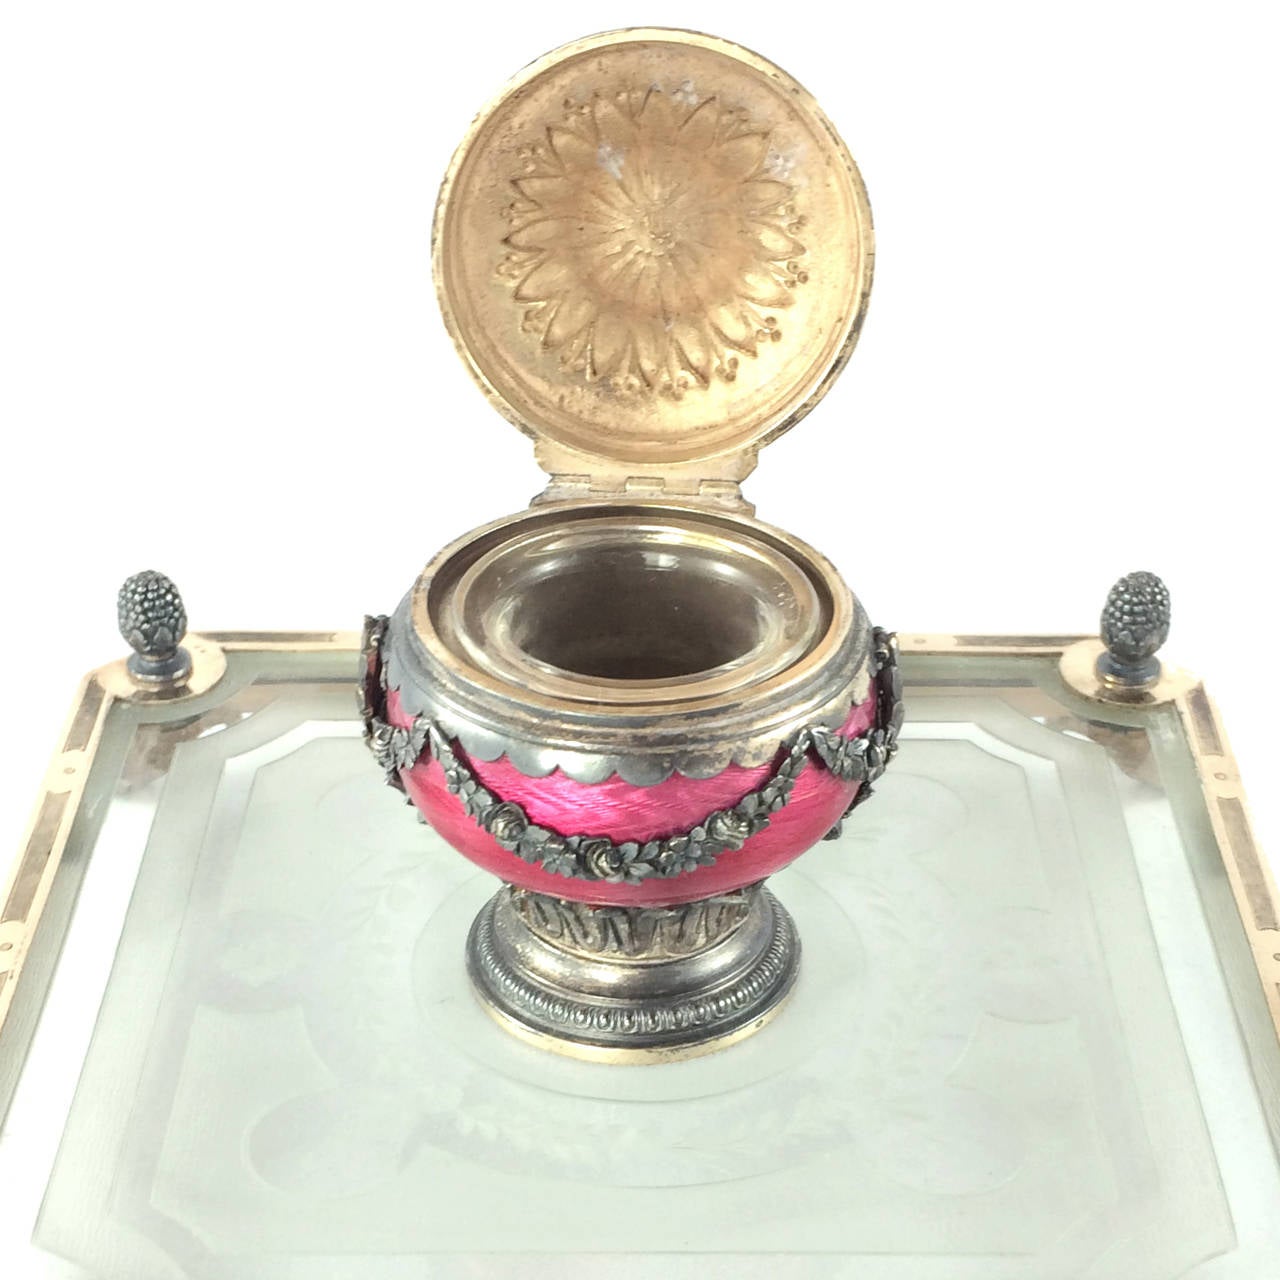 Early 20th Century French Guilloché Enamel and Gilt Silver Inkwell For Sale 2